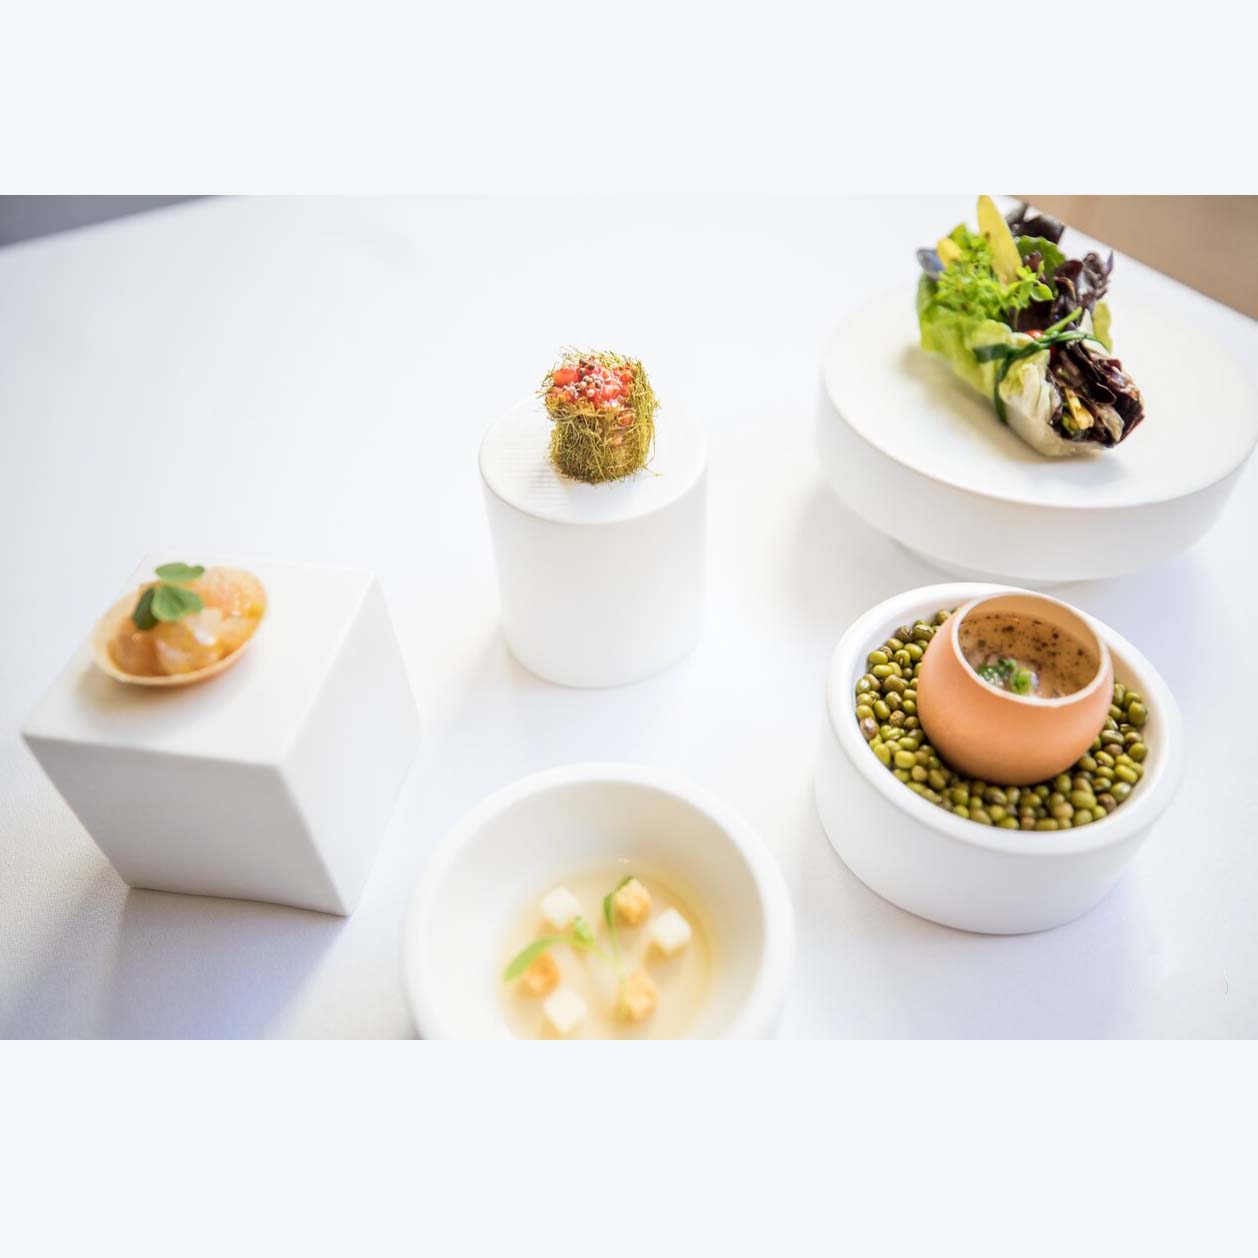 A display of food from Michelin star restaurant Jungsik